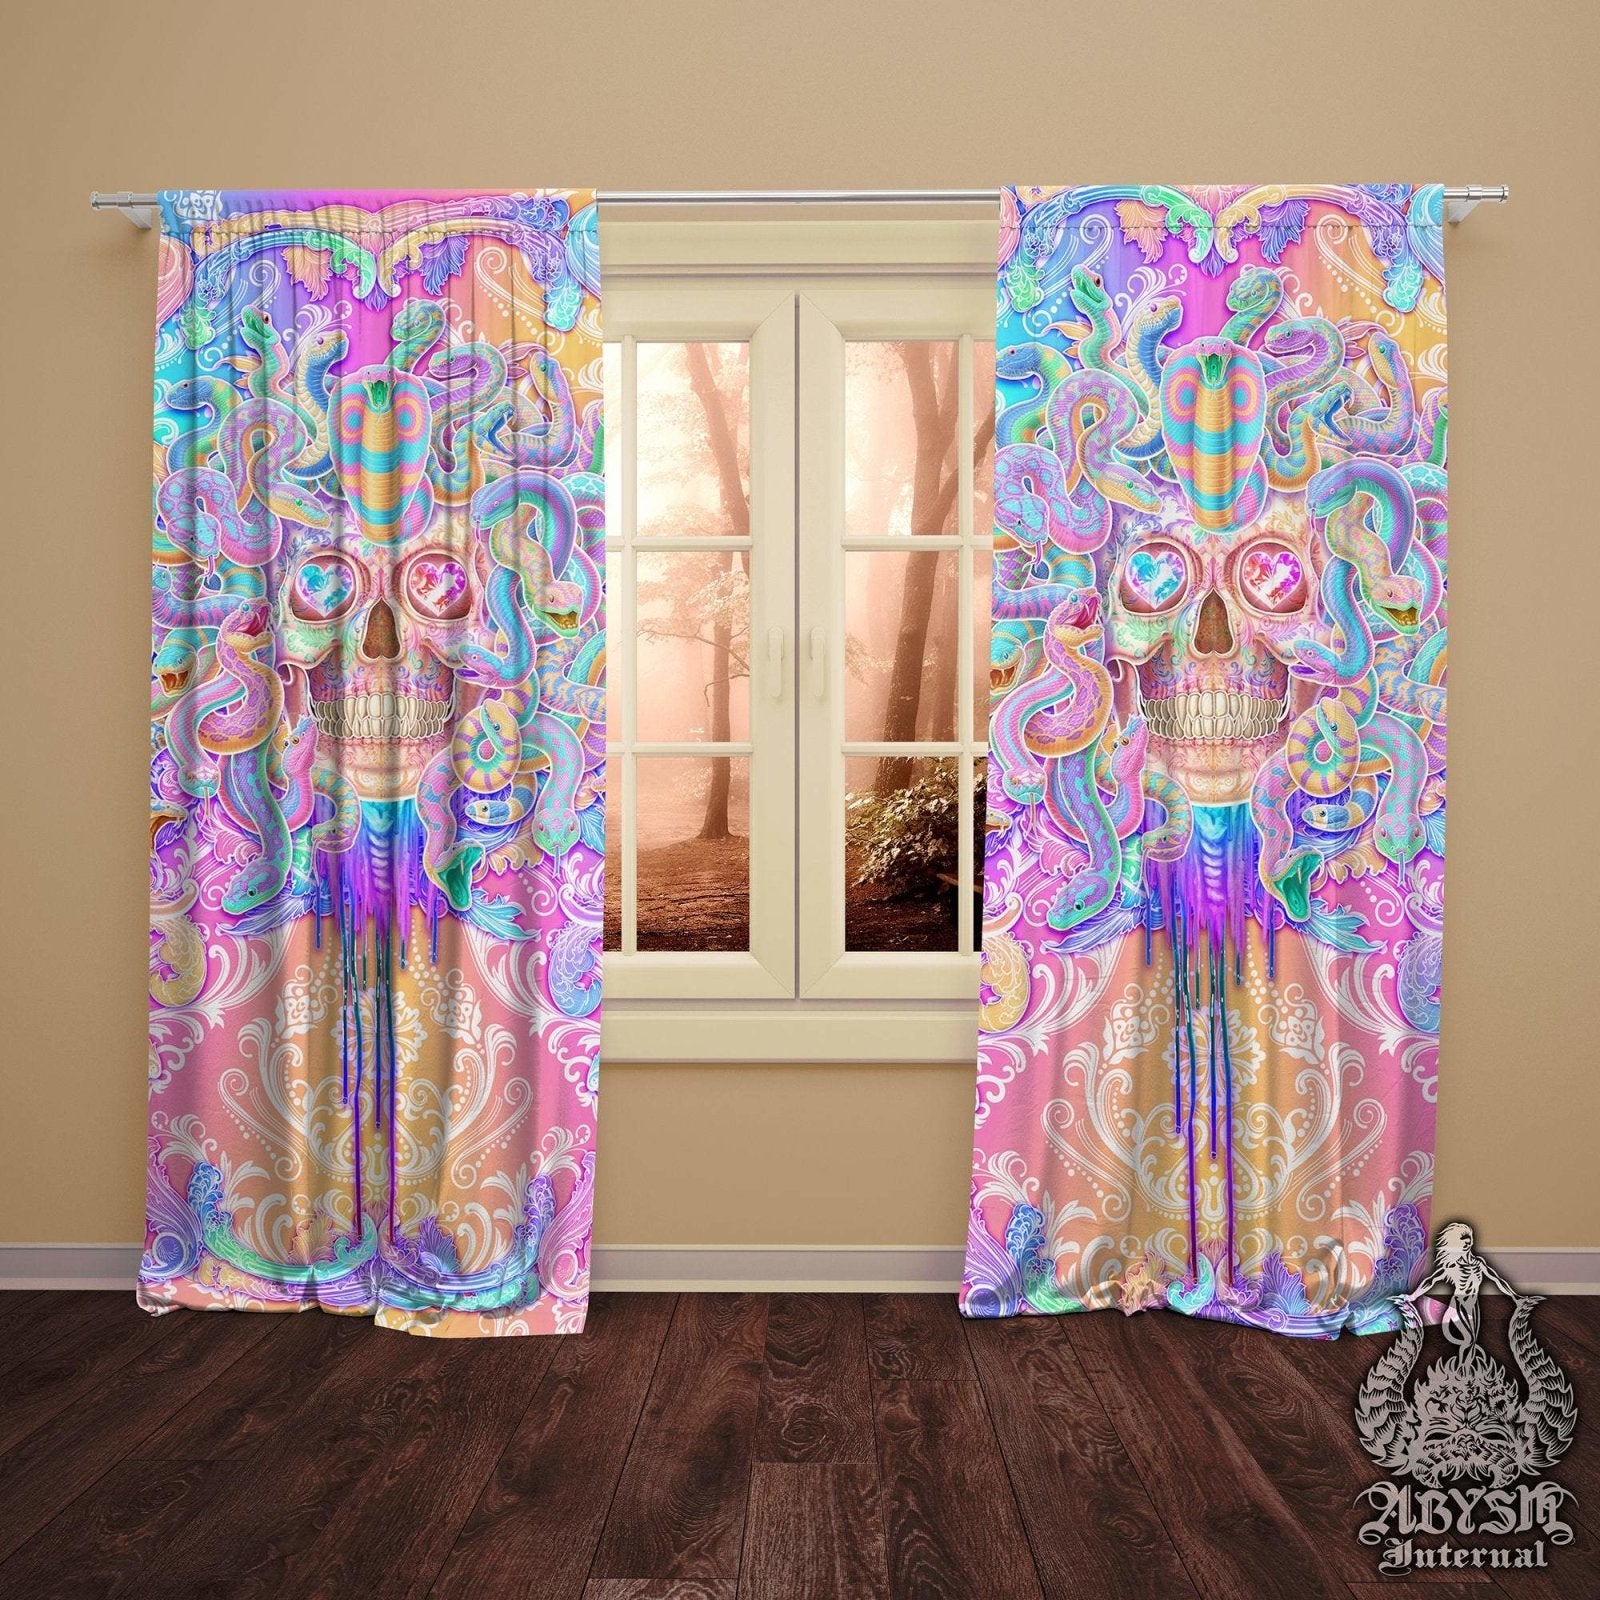 Aesthetic Blackout Curtains, Long Window Panels, Psychedelic Art Print, Kawaii Gamer Room Decor, Funky and Eclectic Home Decor - Pastel Medusa Skull & Snakes - Abysm Internal